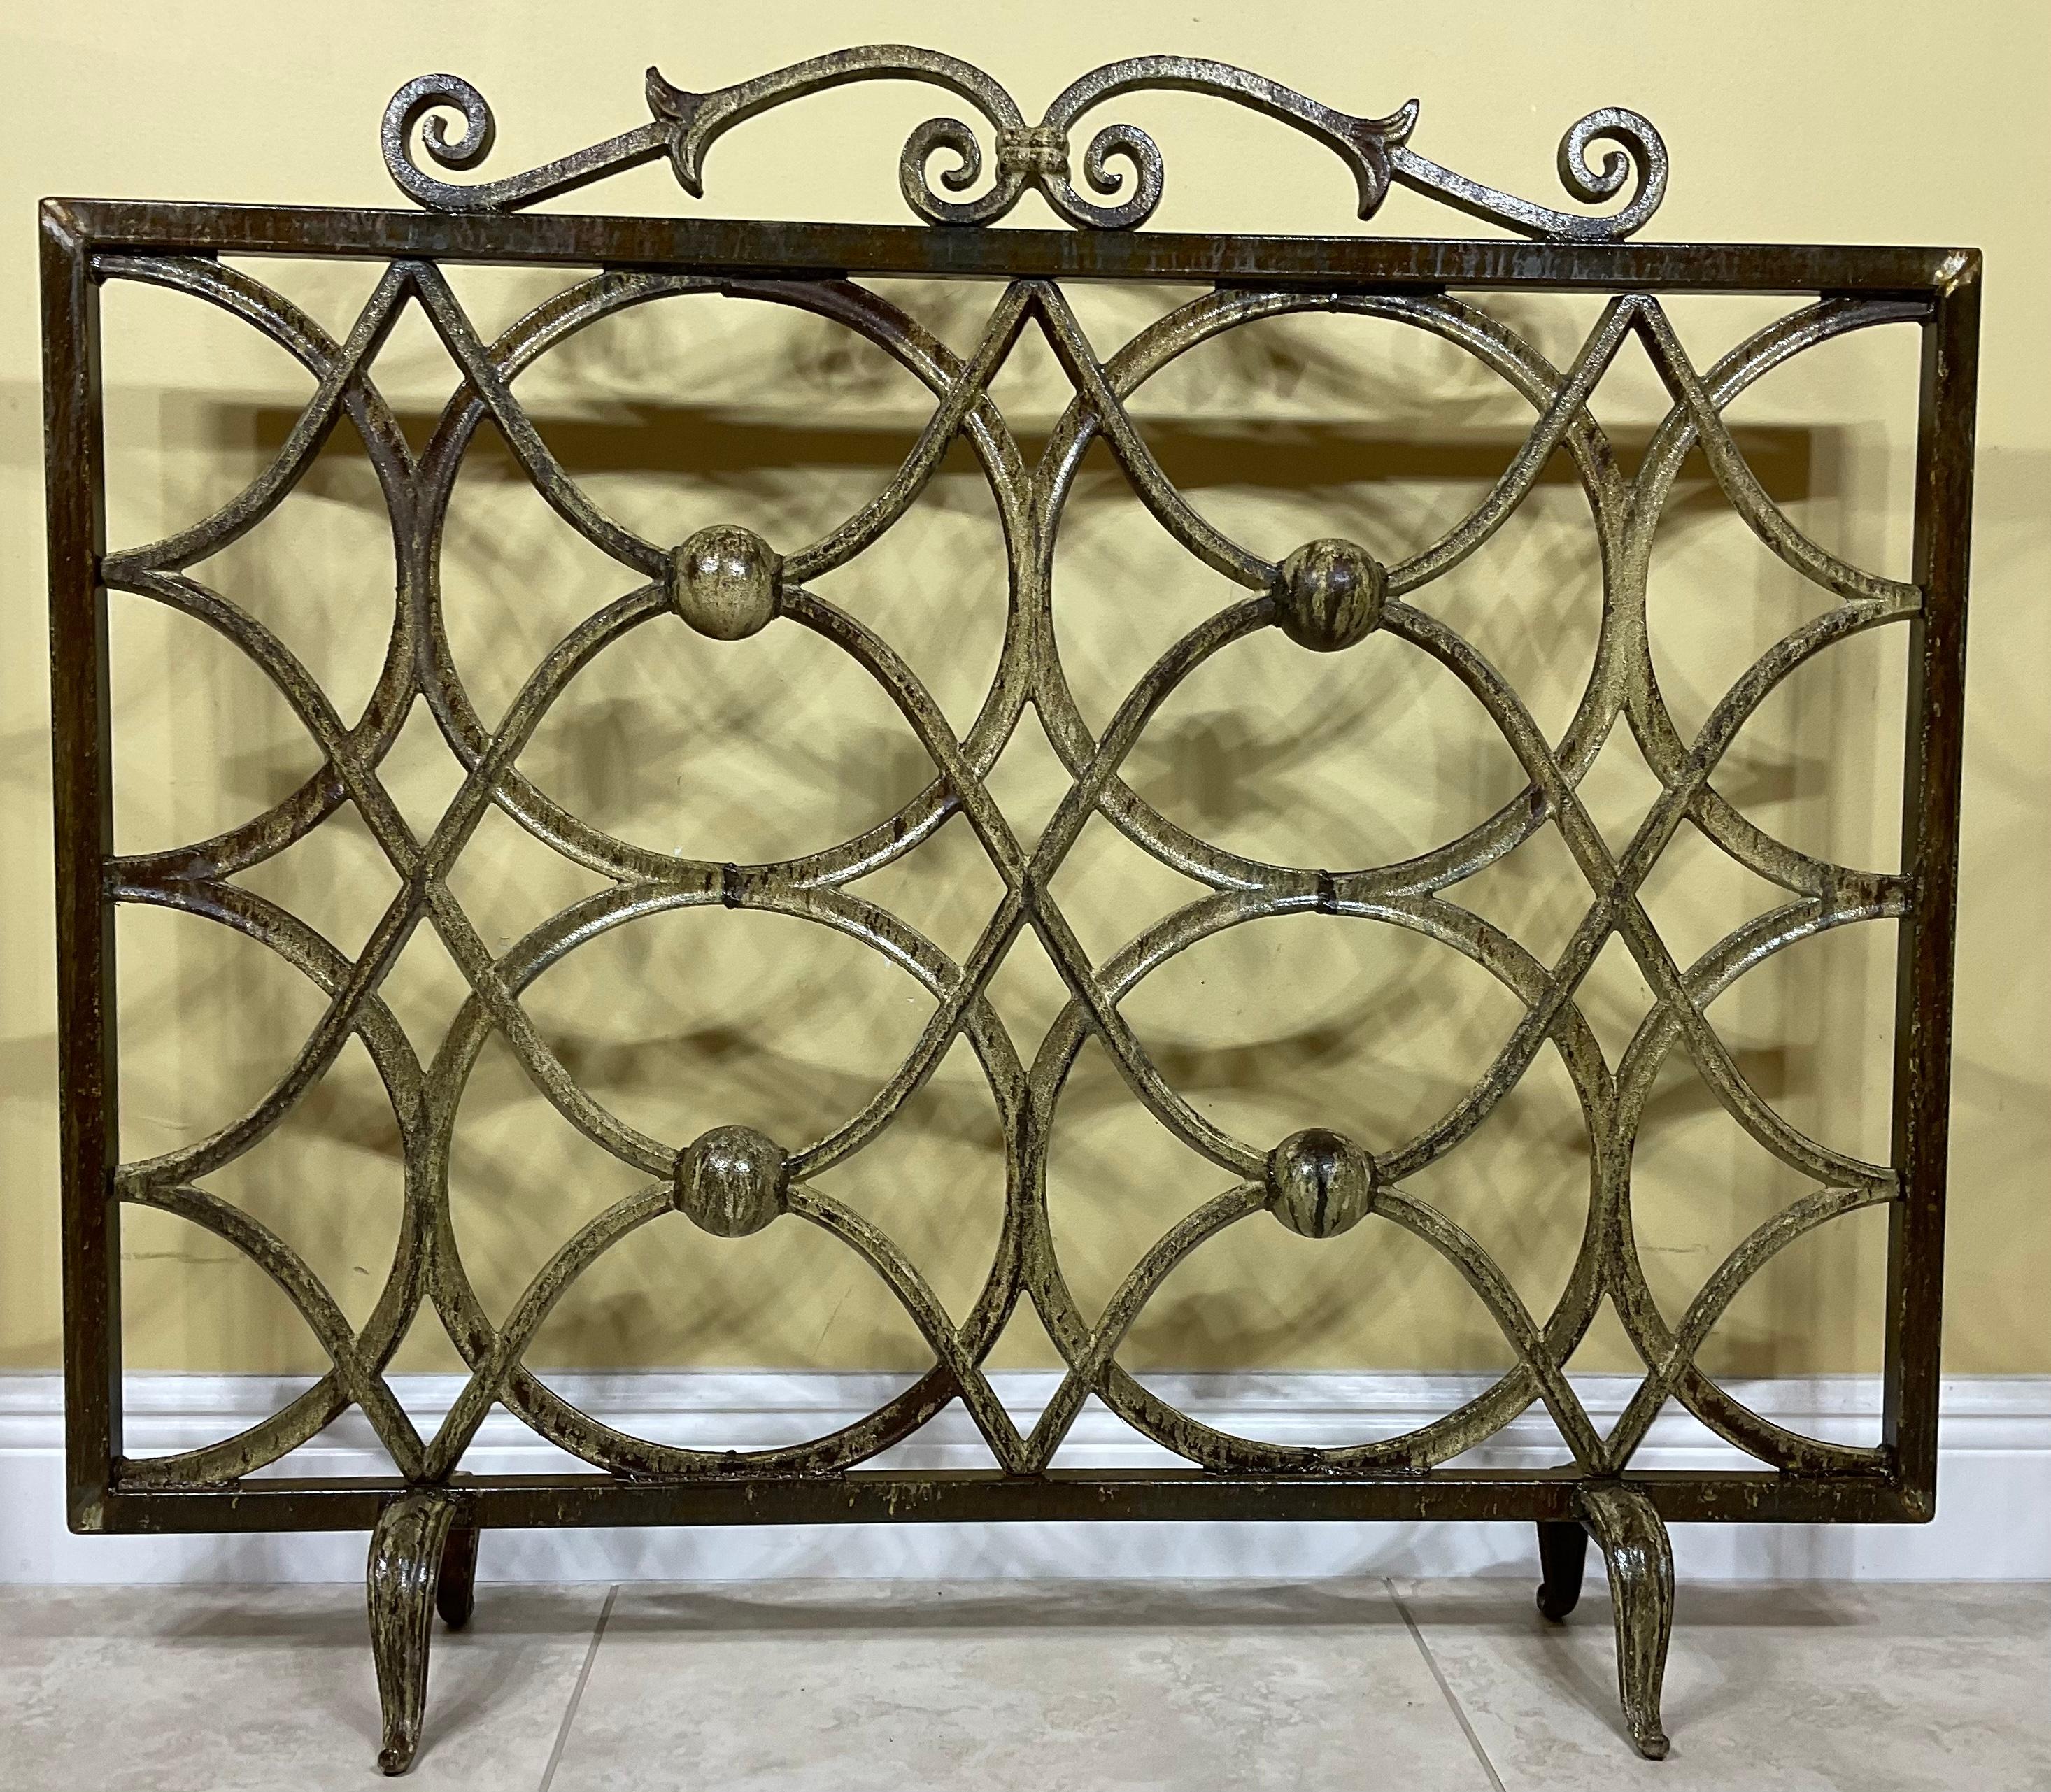 Elegant fireplace screen made of cast iron with artistic circular motifs all around, treated and sealed for rust, great object of art for display.